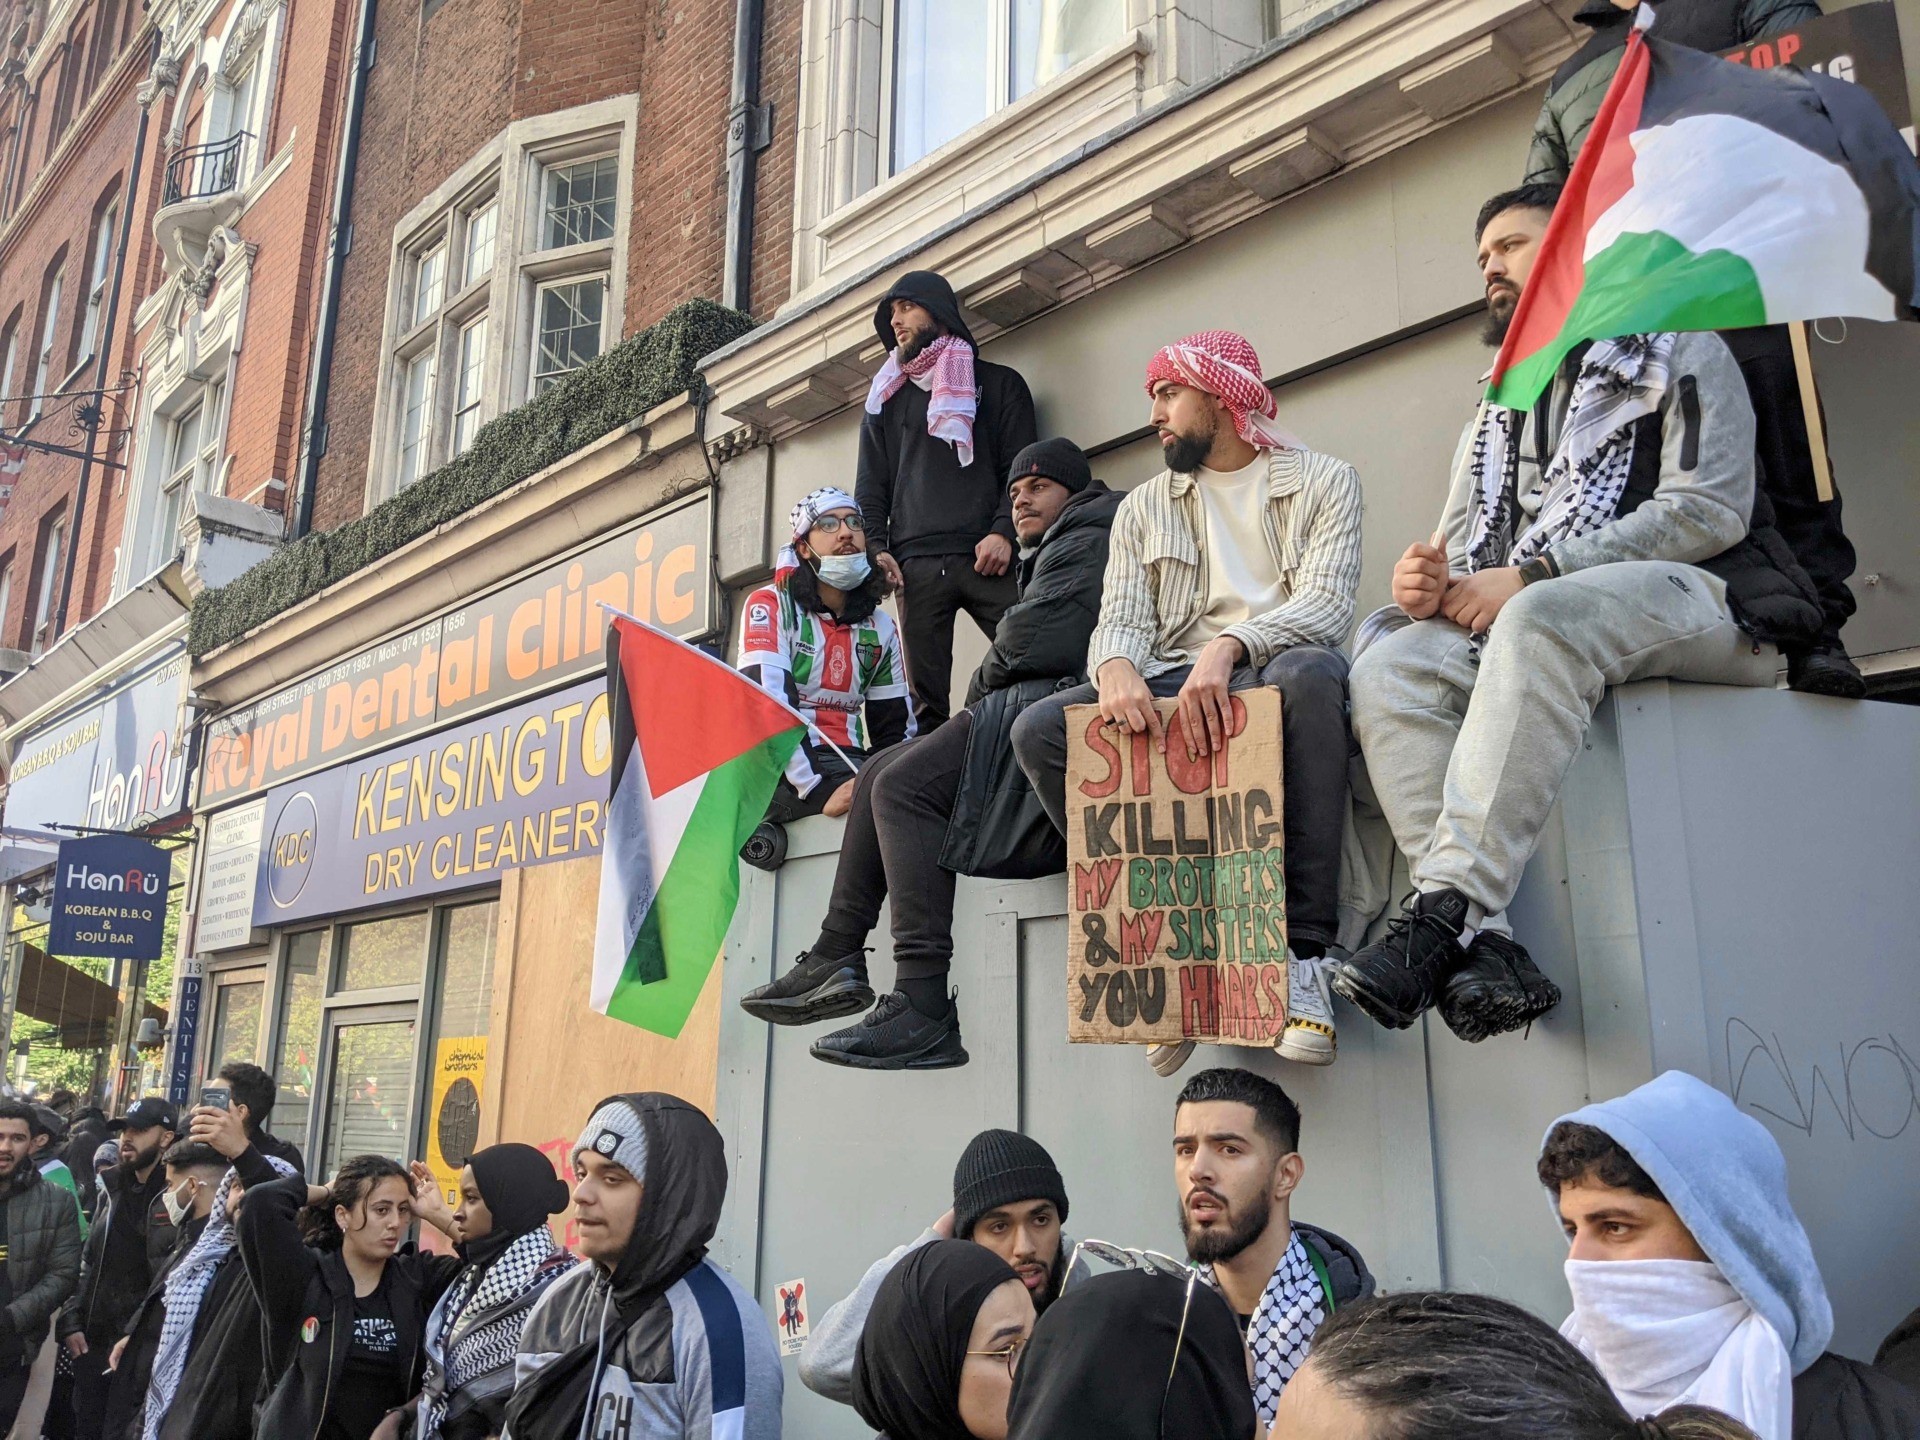 Thousands of Anti-Israel protesters demonstrated in London on May 15th following increased tensions in the conflict with Palestine. Kurt Zindulka, Breitbart News